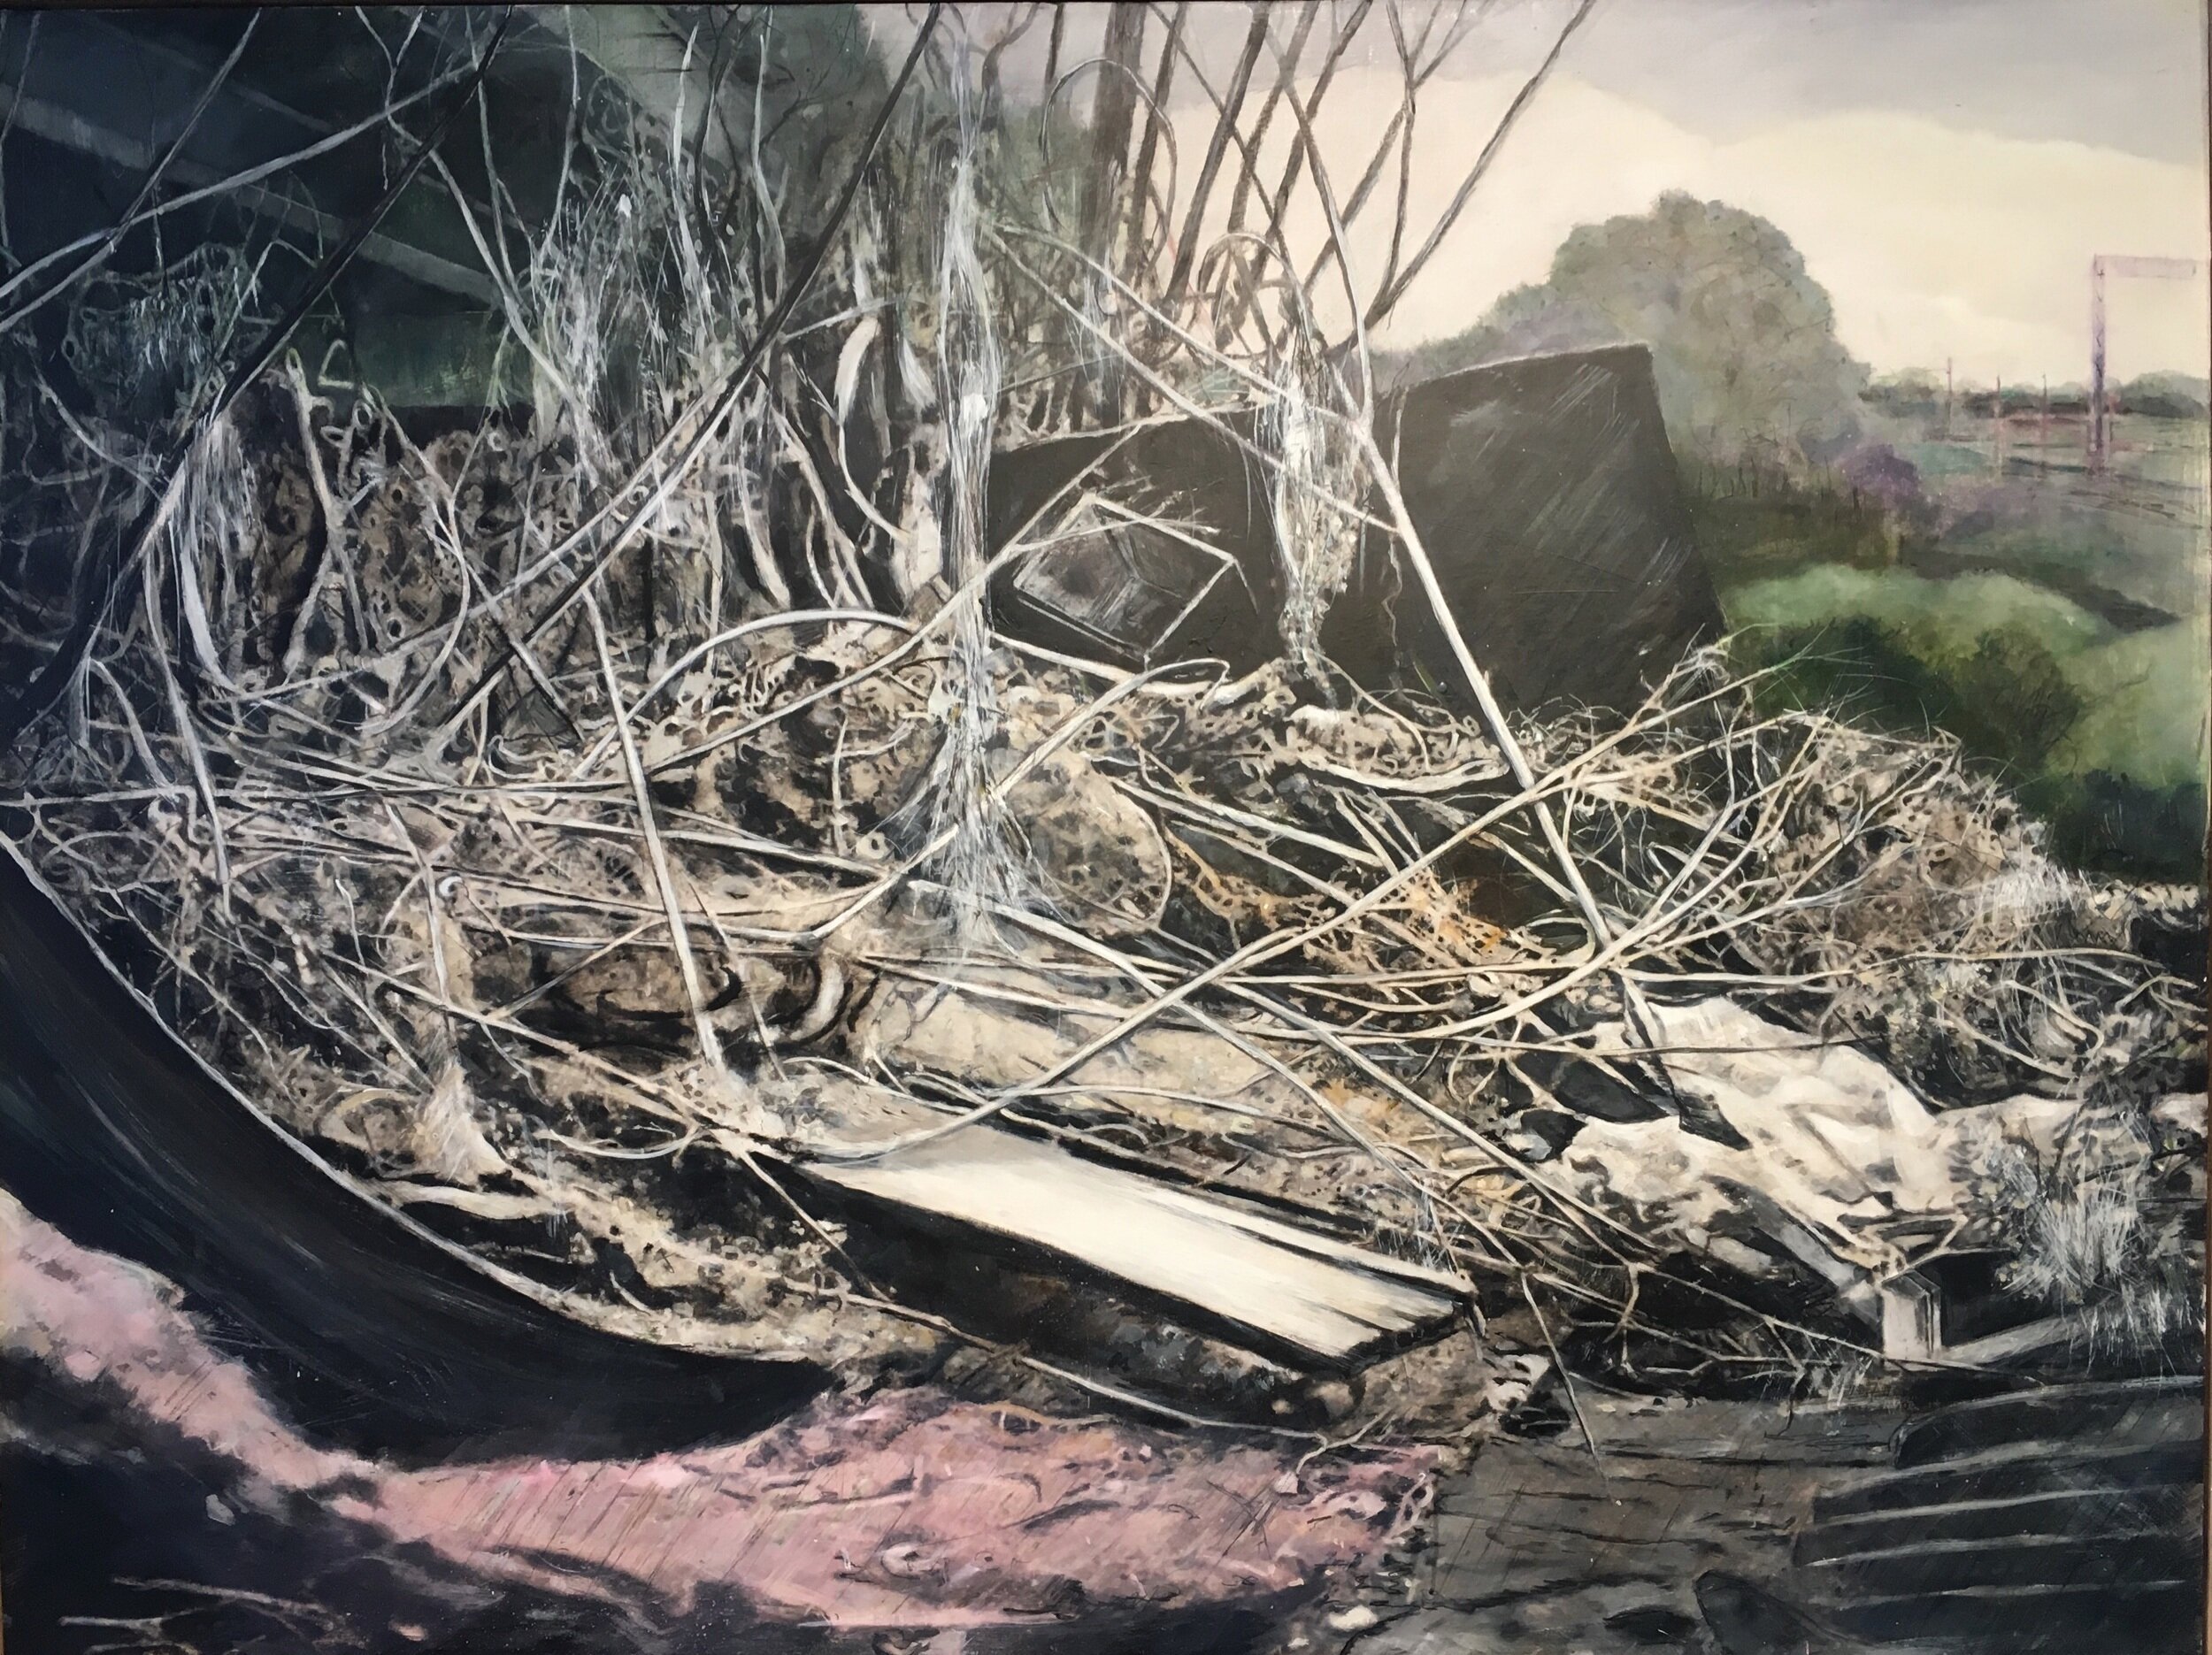 Murmur of a faded landscape: 2019  oil and mixed media on gesso hardboard  81 x 100 cm